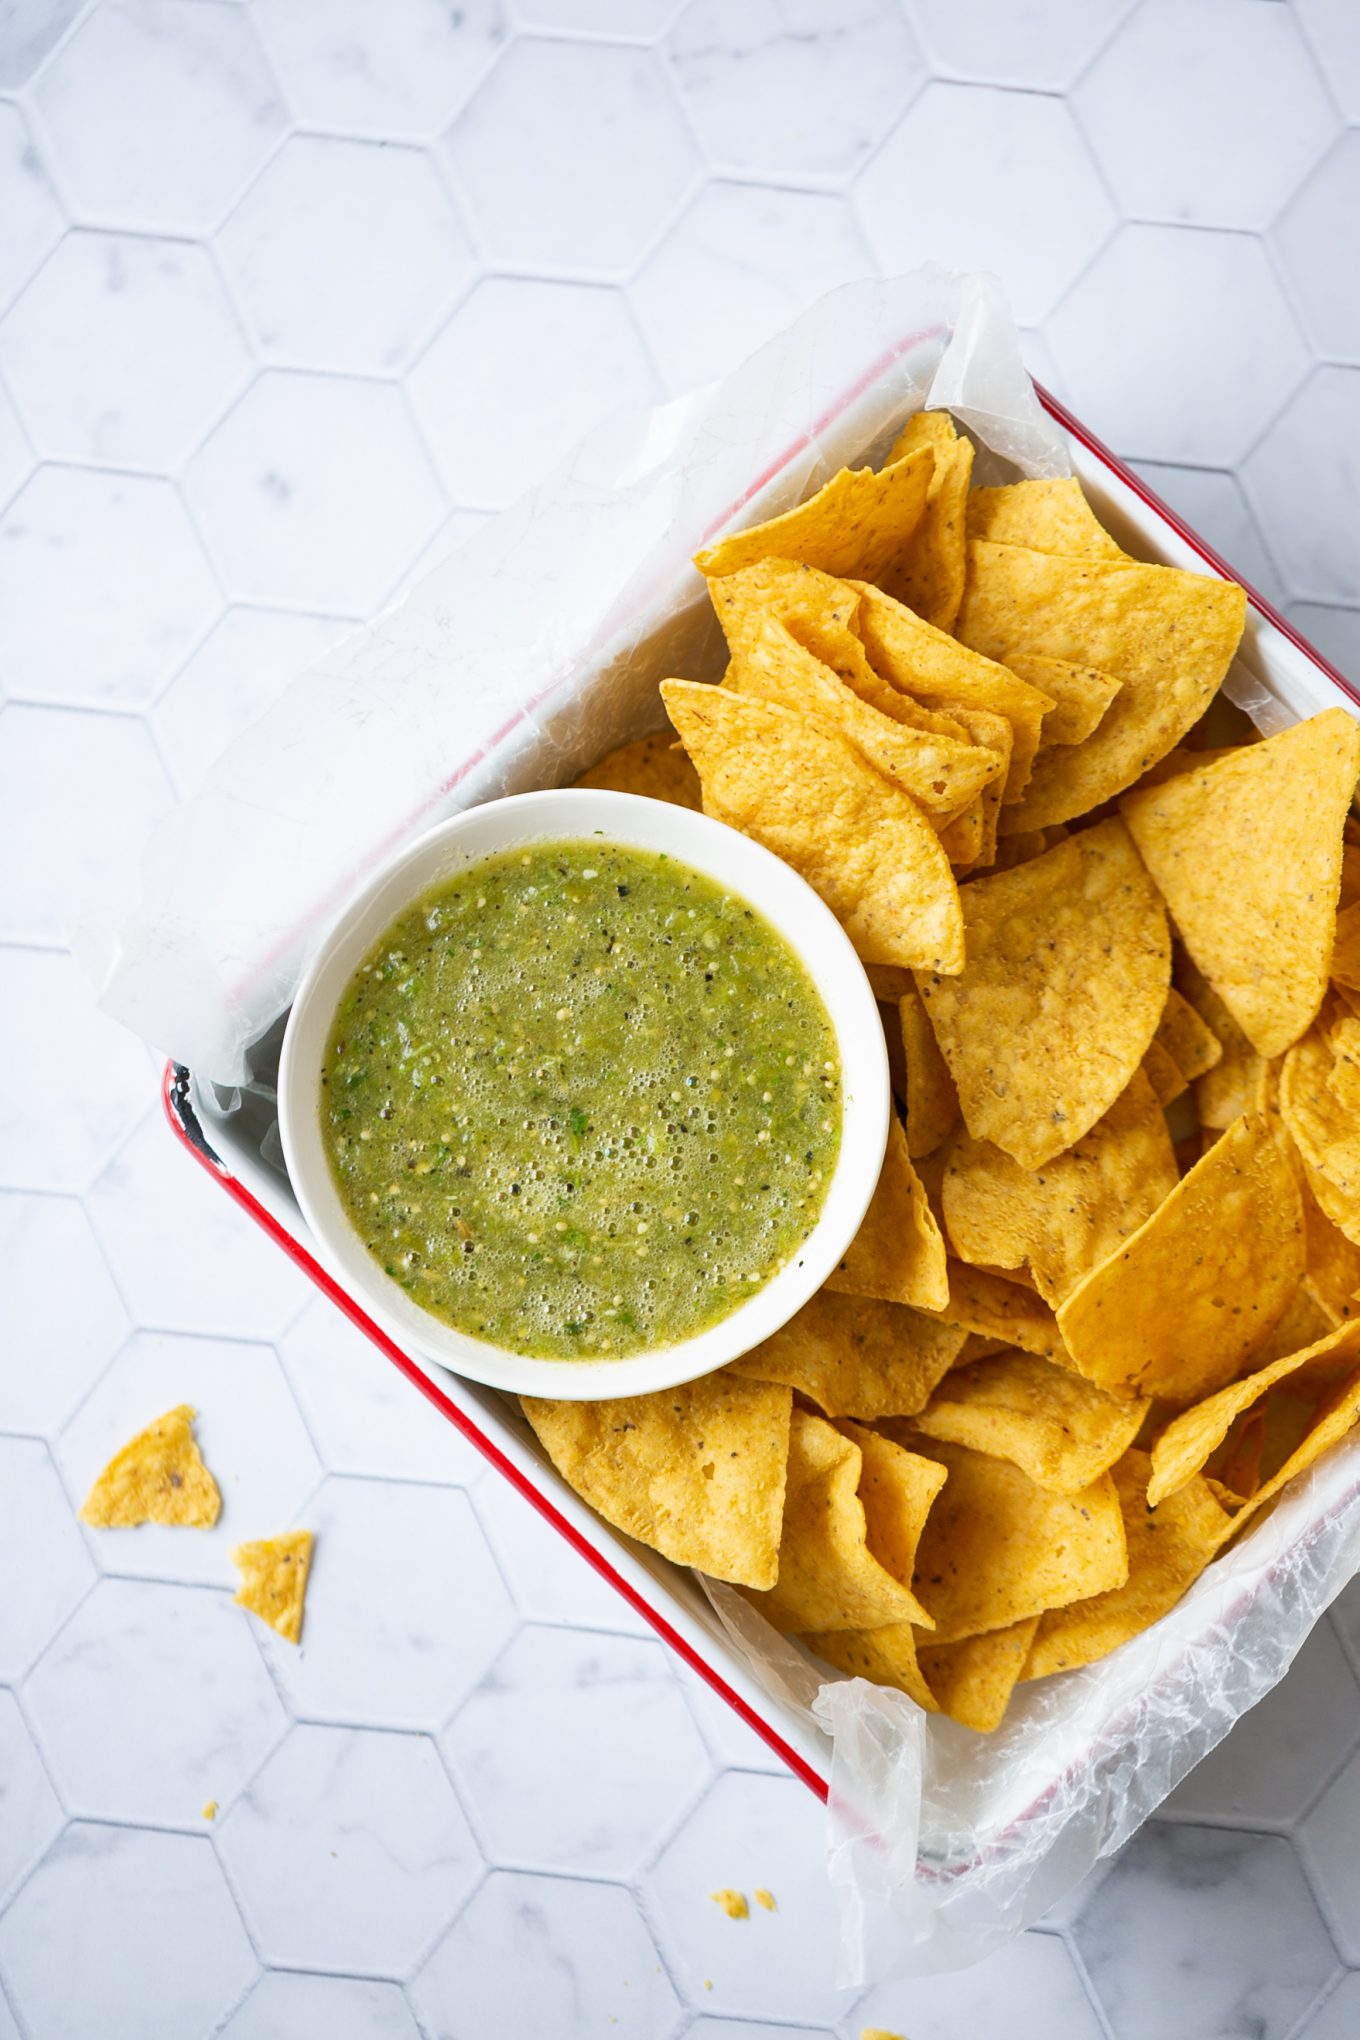 tray of chips and a bowl of authentic mexican salsa verde